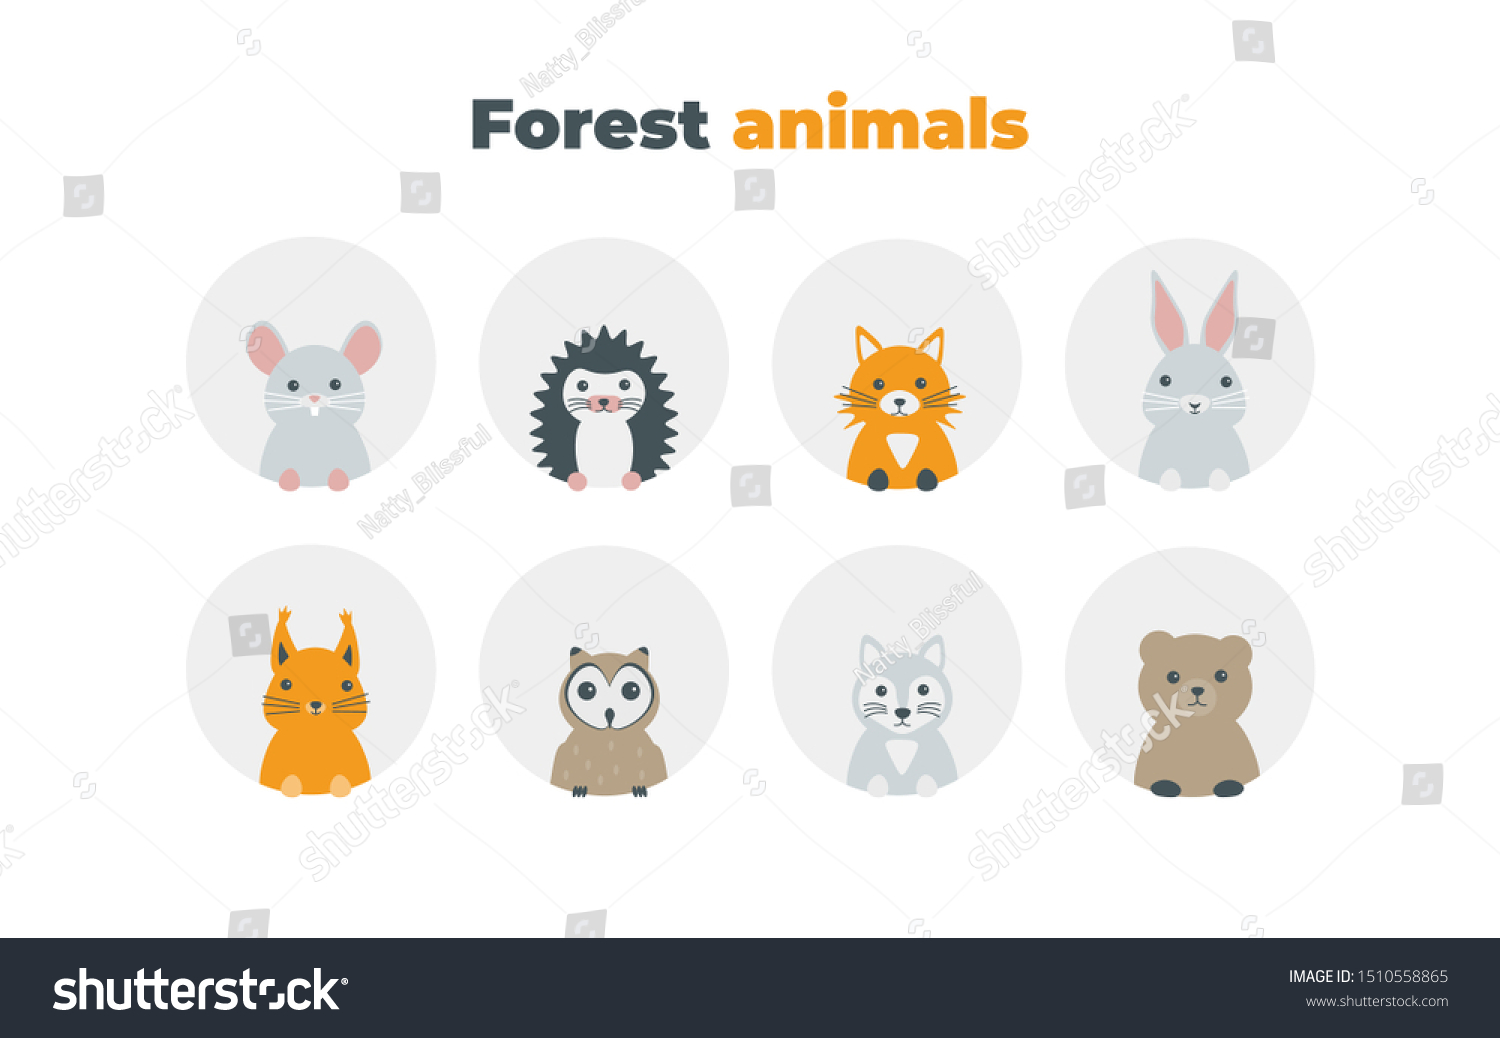 SVG of Forest animals set in flat style isolated on white background. Cute cartoon wild animals avatars collection: mouse, hedgehog, fox, hare, squirrel, owl, wolf, bear. svg